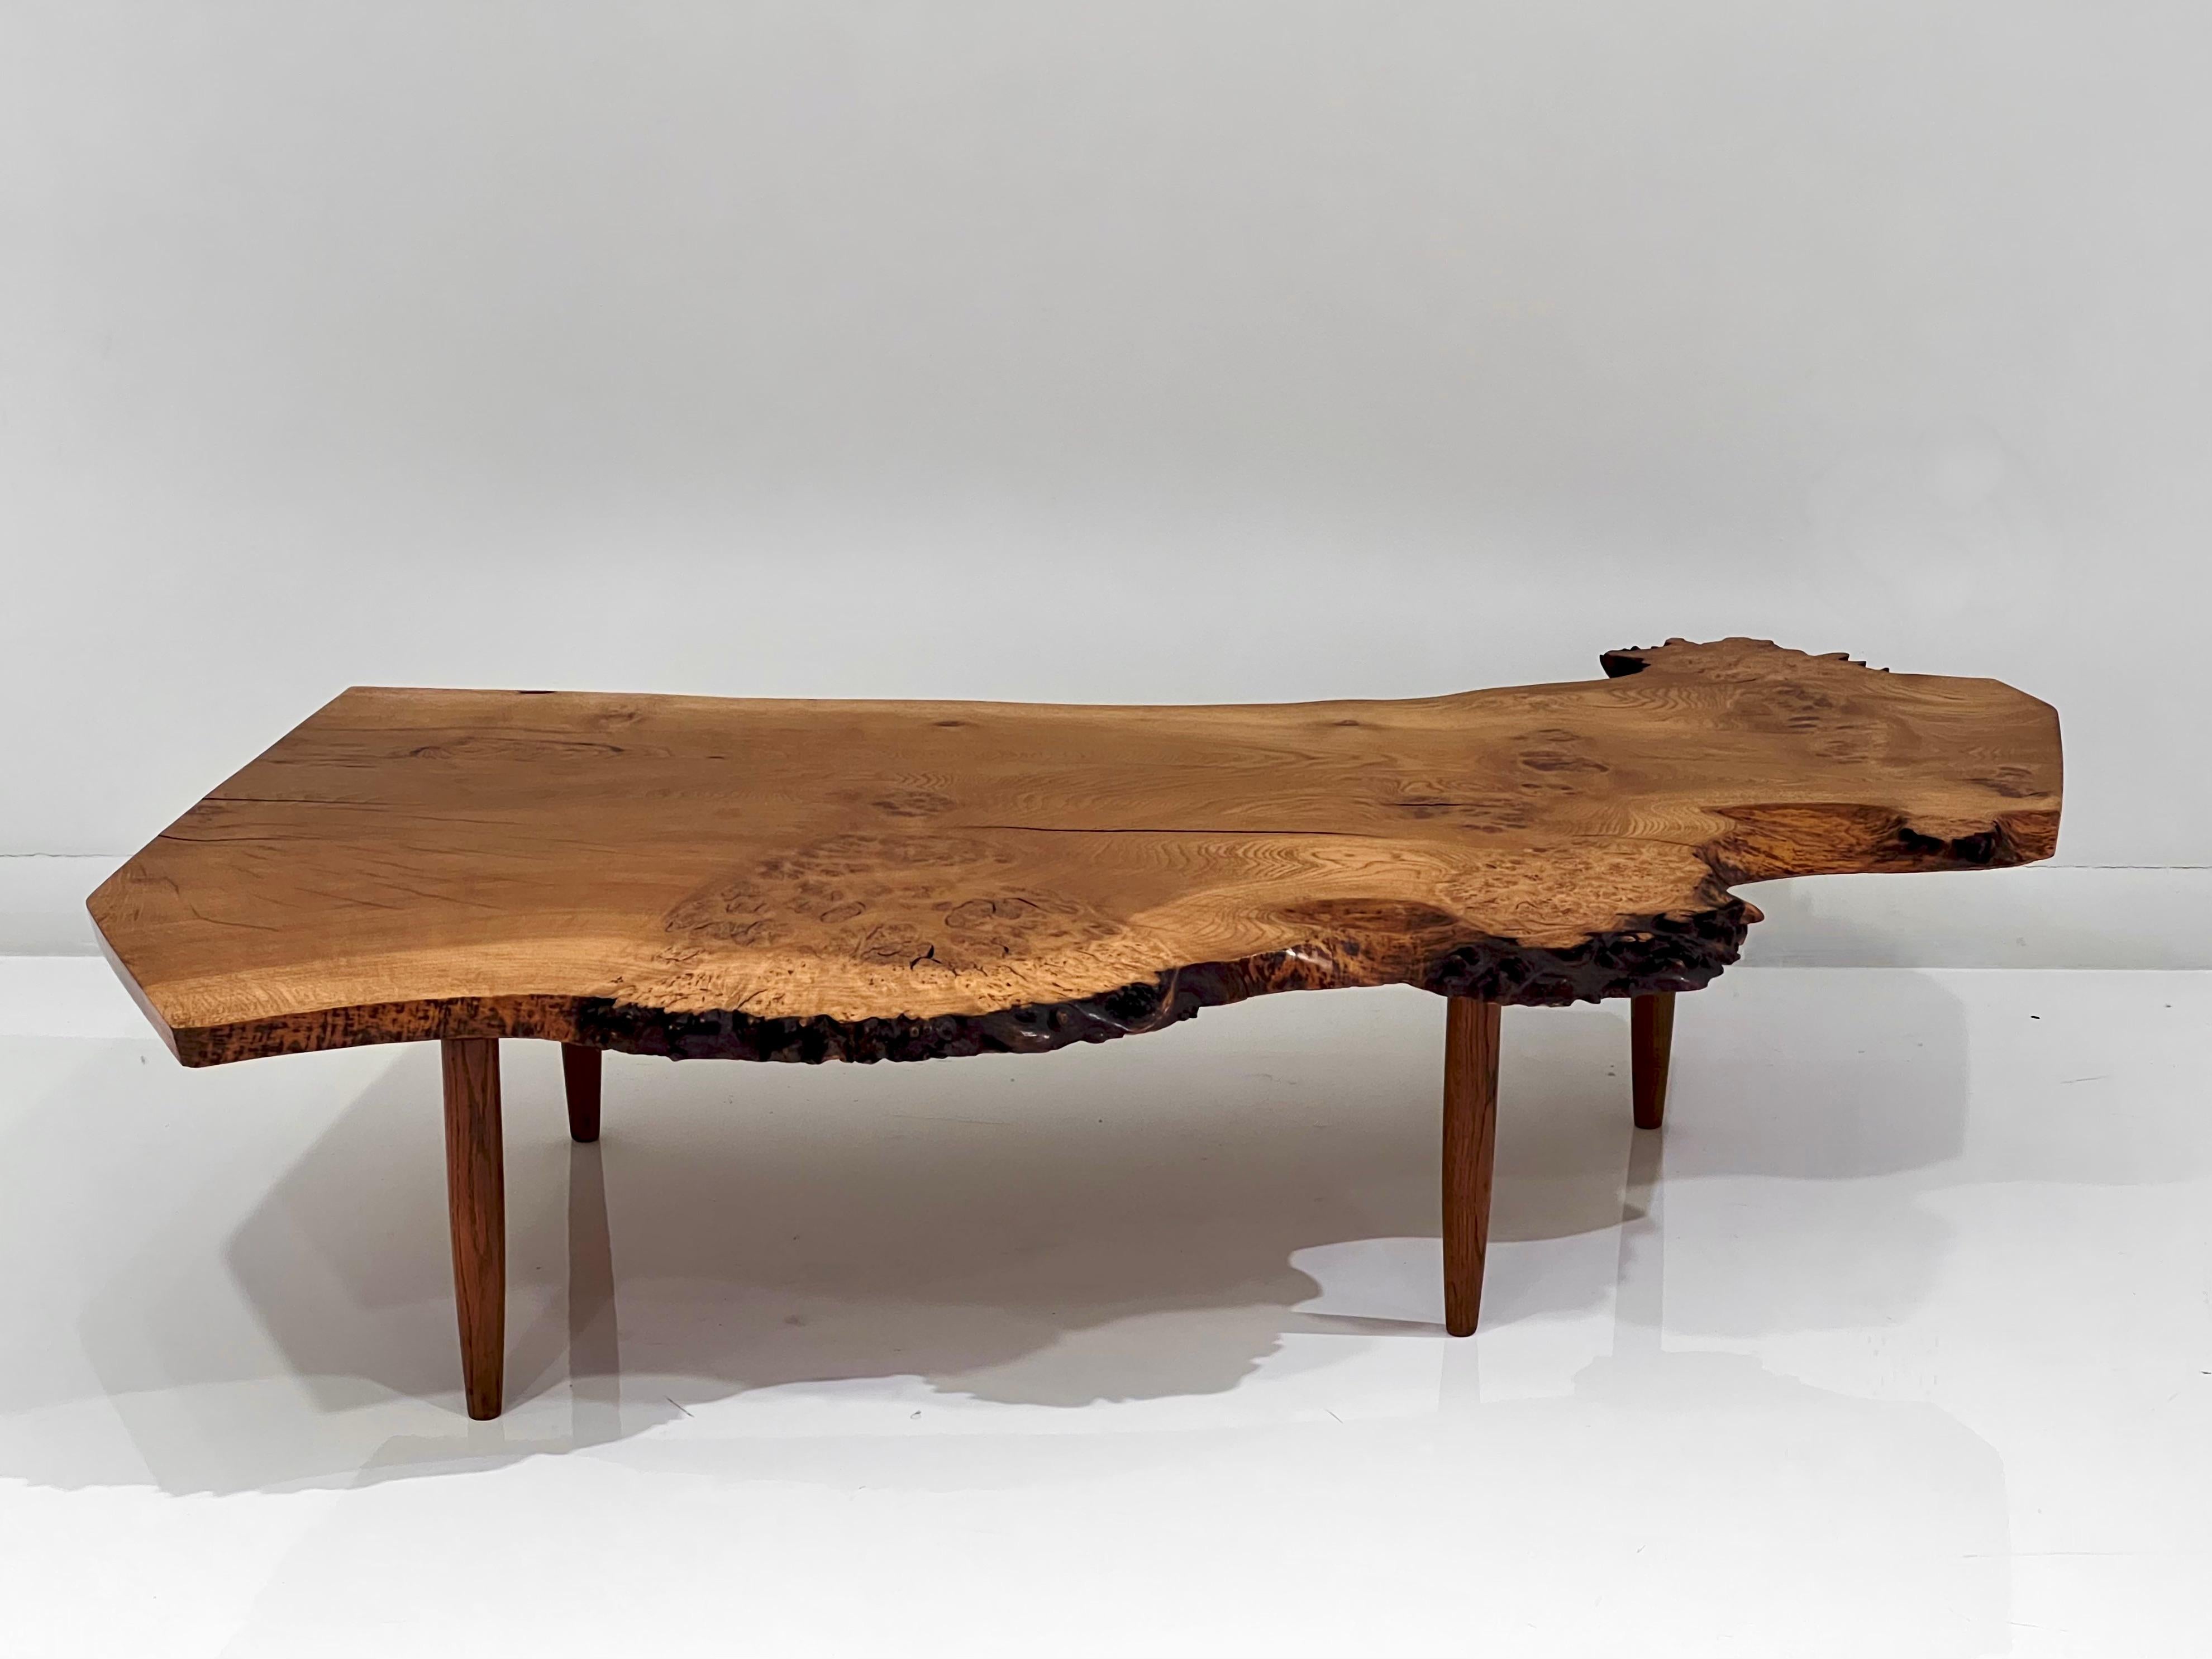 Phenomenal live edge coffee table by George Nakashima. circa 1960s with an organic walnut burl flow.
Approximate overall dimensions: 58